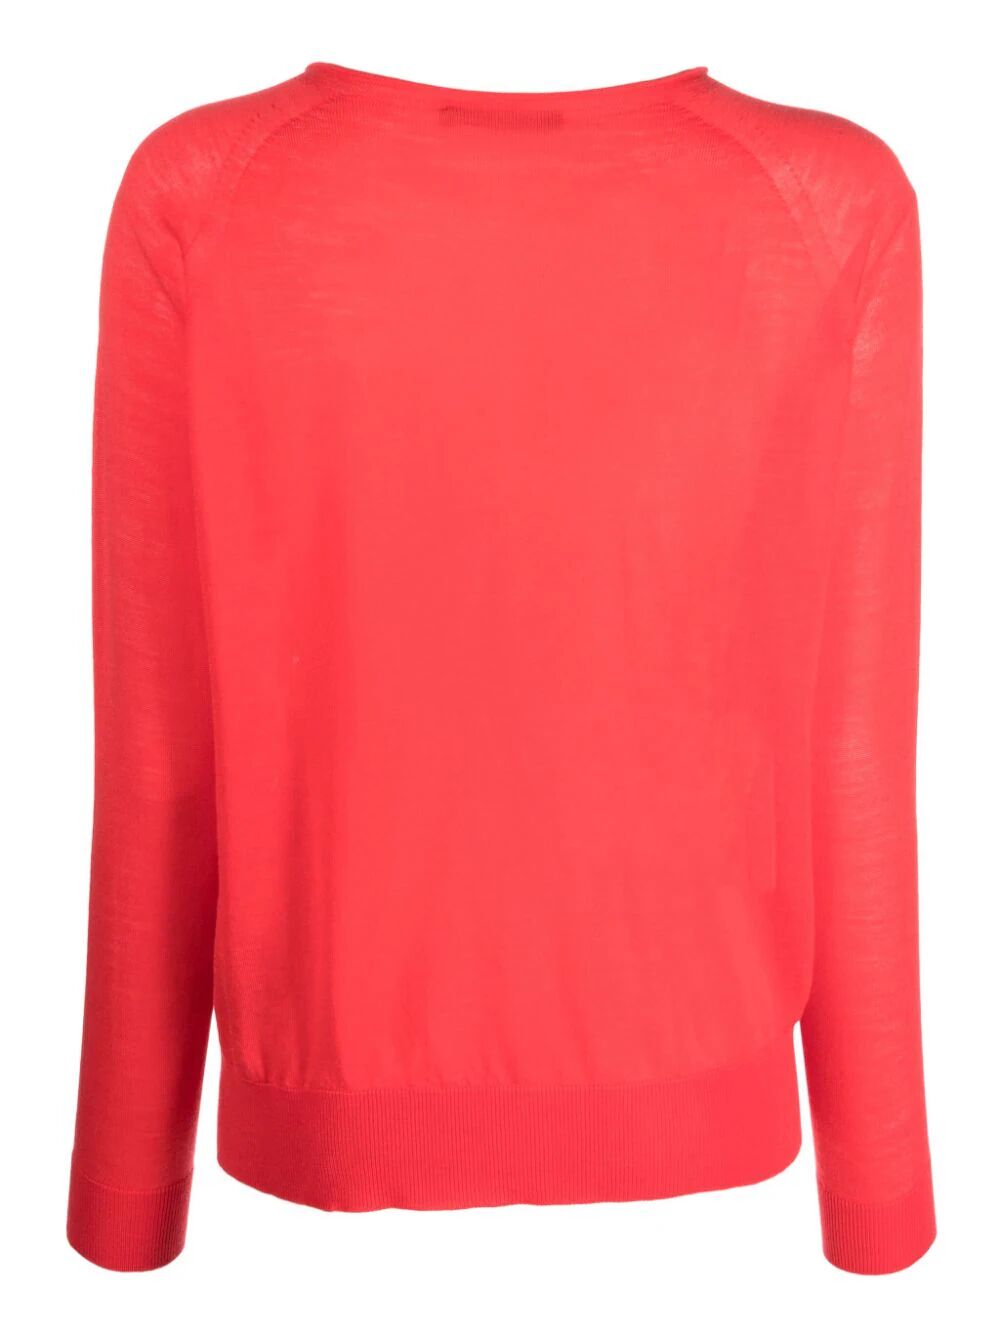 Shop Nuur Boat Neck Sweater In Red